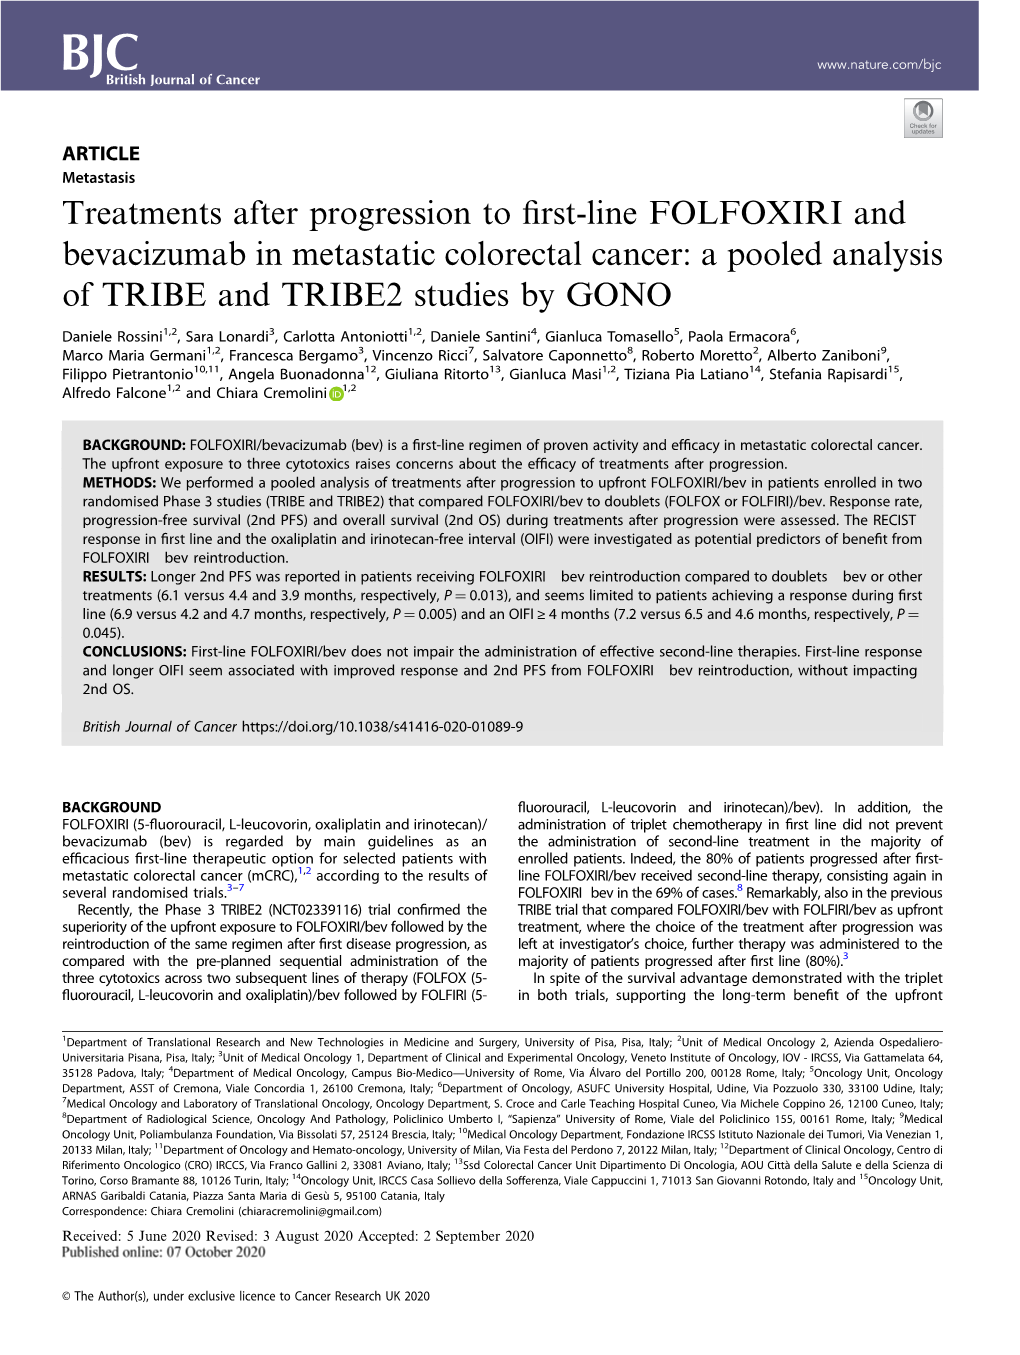 Treatments After Progression to First-Line FOLFOXIRI